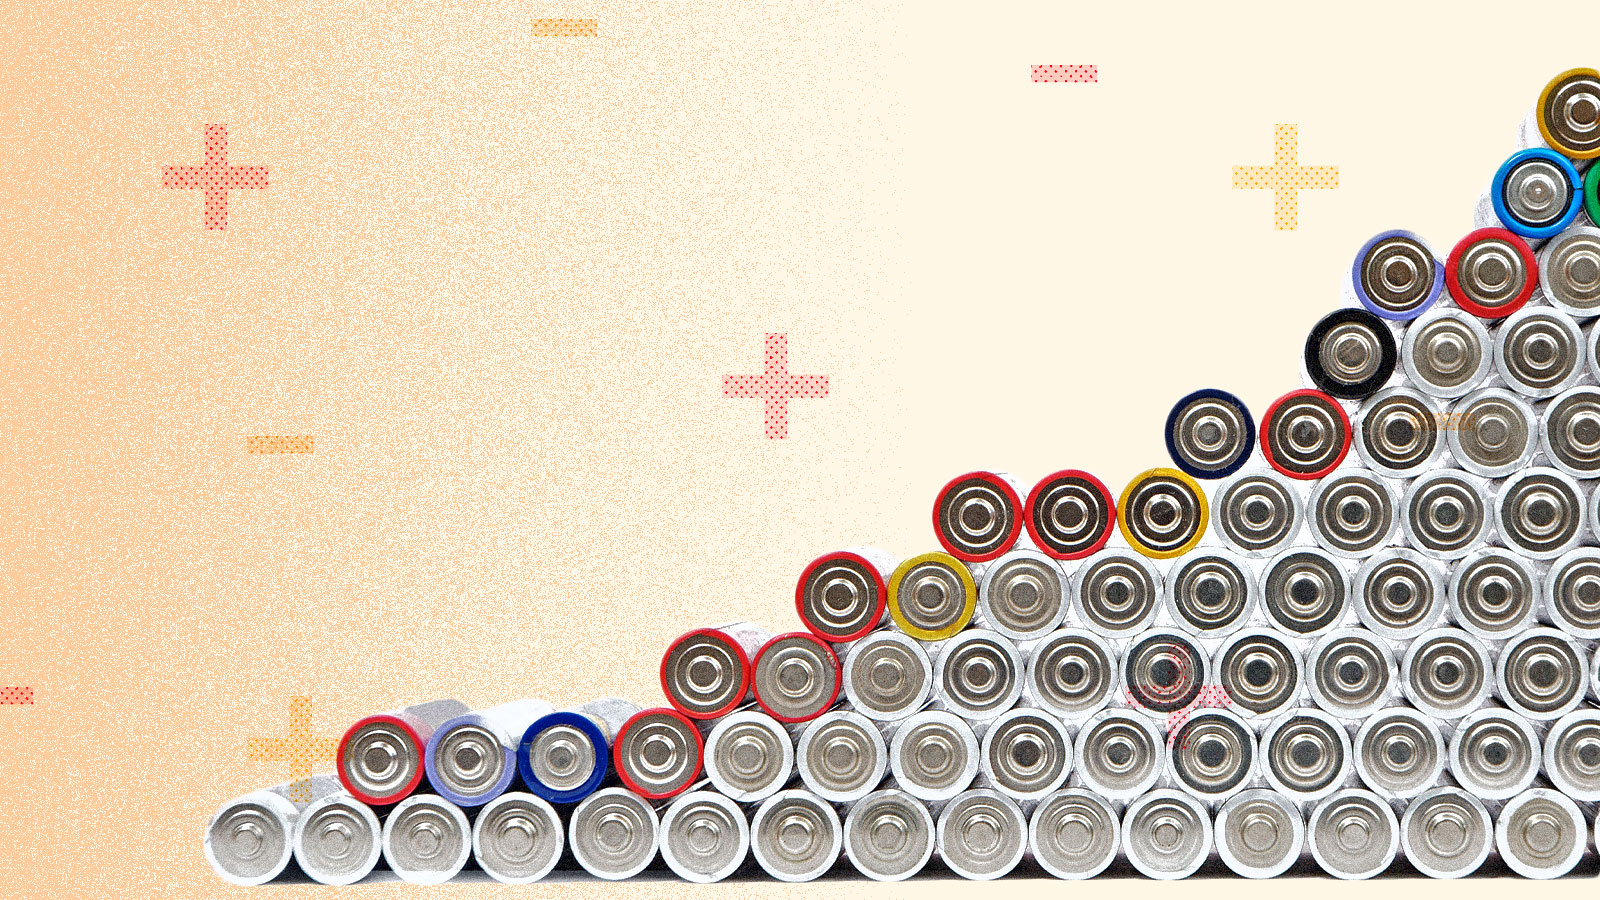 A stack of batteries with plus and minus signs